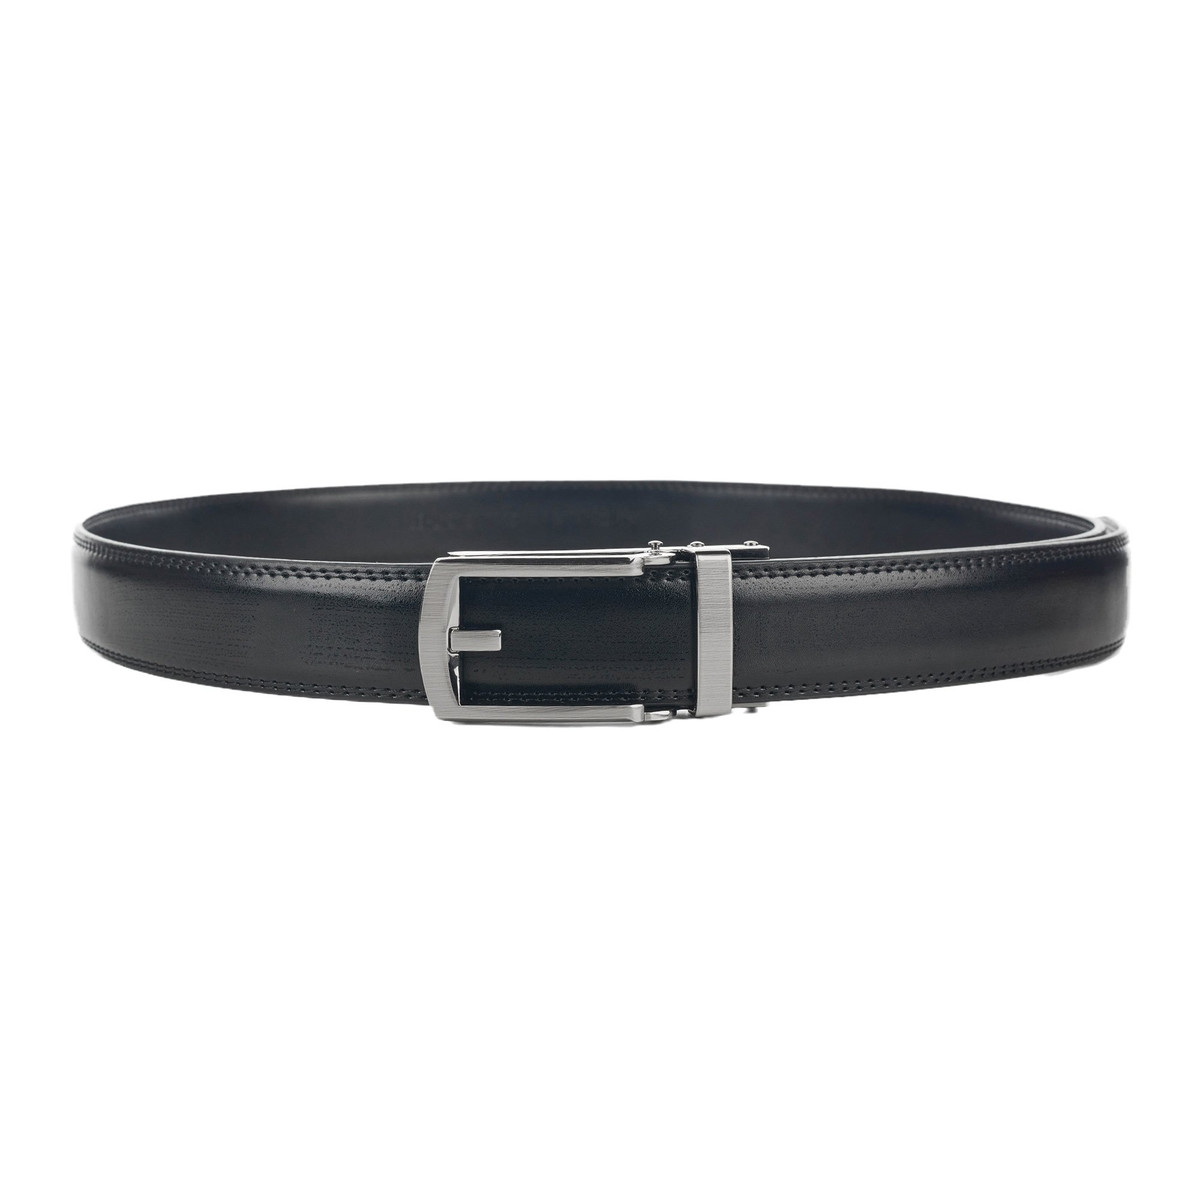 Men's Genuine Leather Ratchet Track Belt with Classic Single Prong Click Buckle - Black